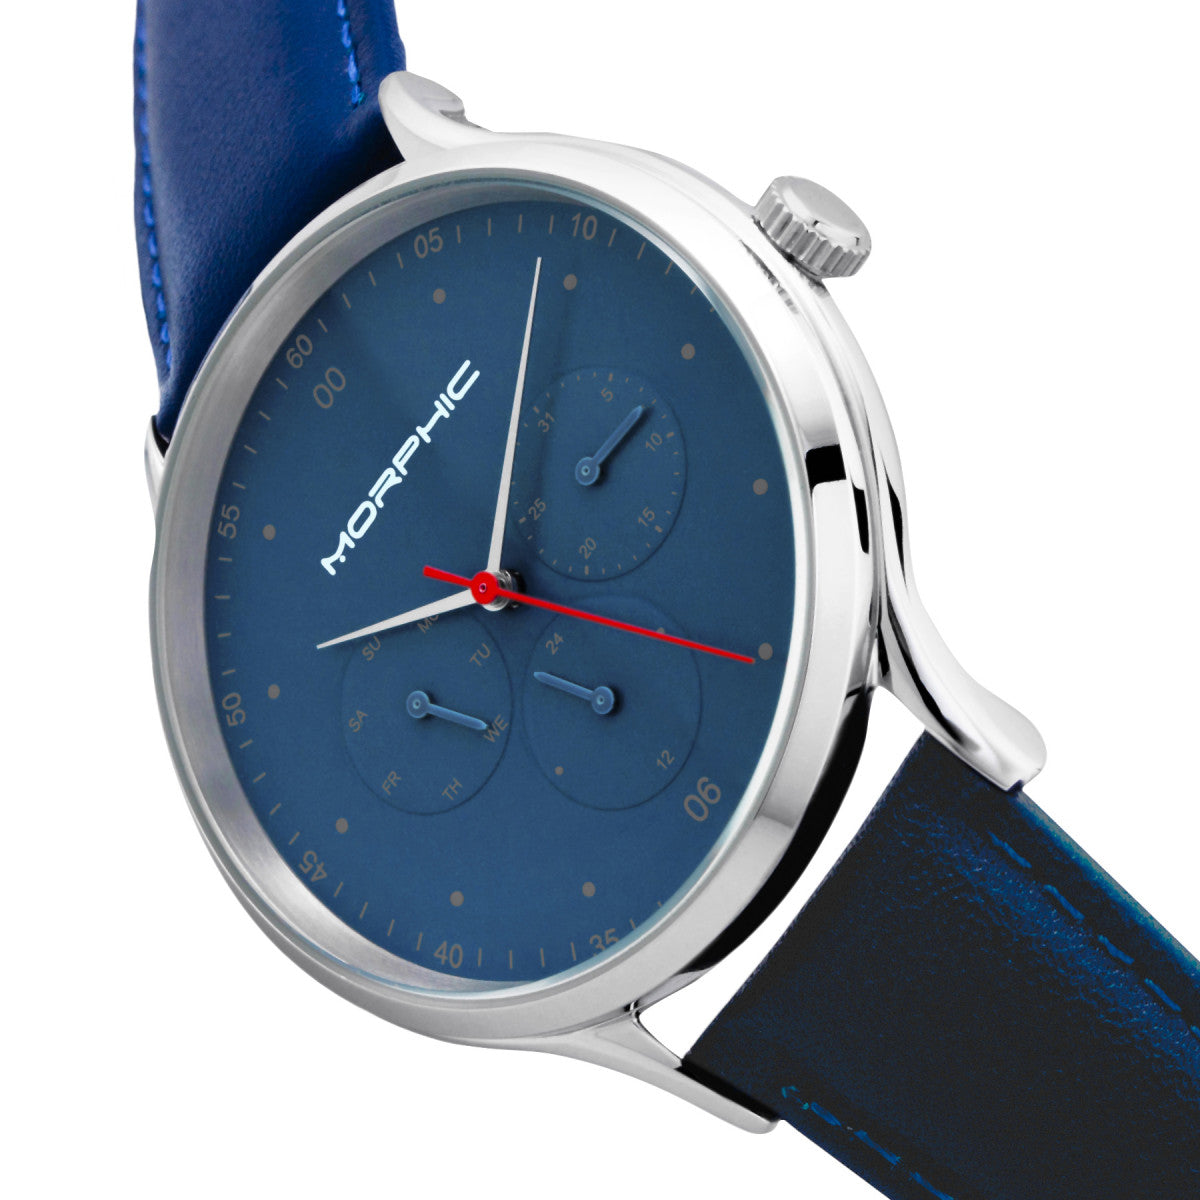 Morphic M65 Series Leather-Band Watch w/Day/Date - Blue - MPH6506